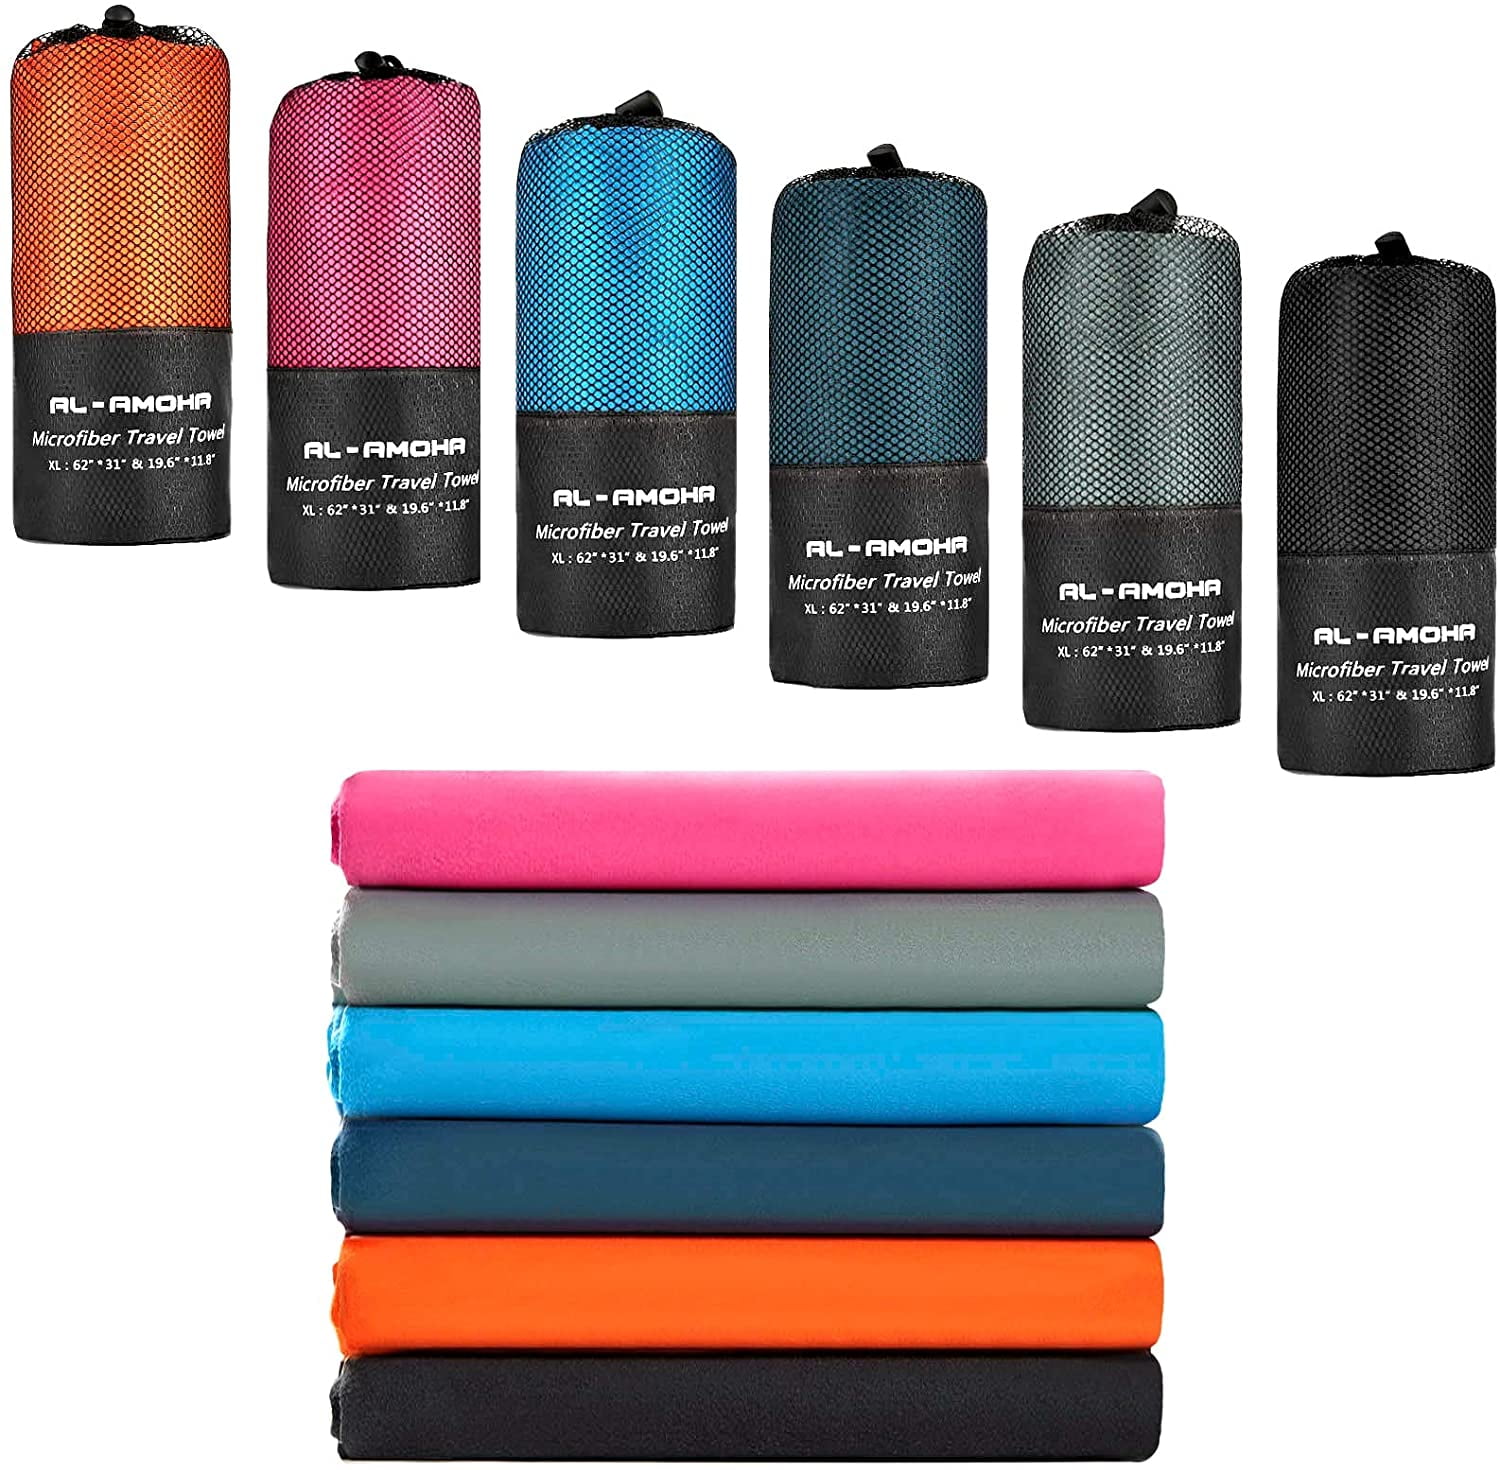 Yoga Camping Sport Travel Towel Travel Super Absorbent,Compact & Lightweight Gym Fast Drying Towel， Best for Beach Sports Bath Microfiber Beach Towel Swimming 